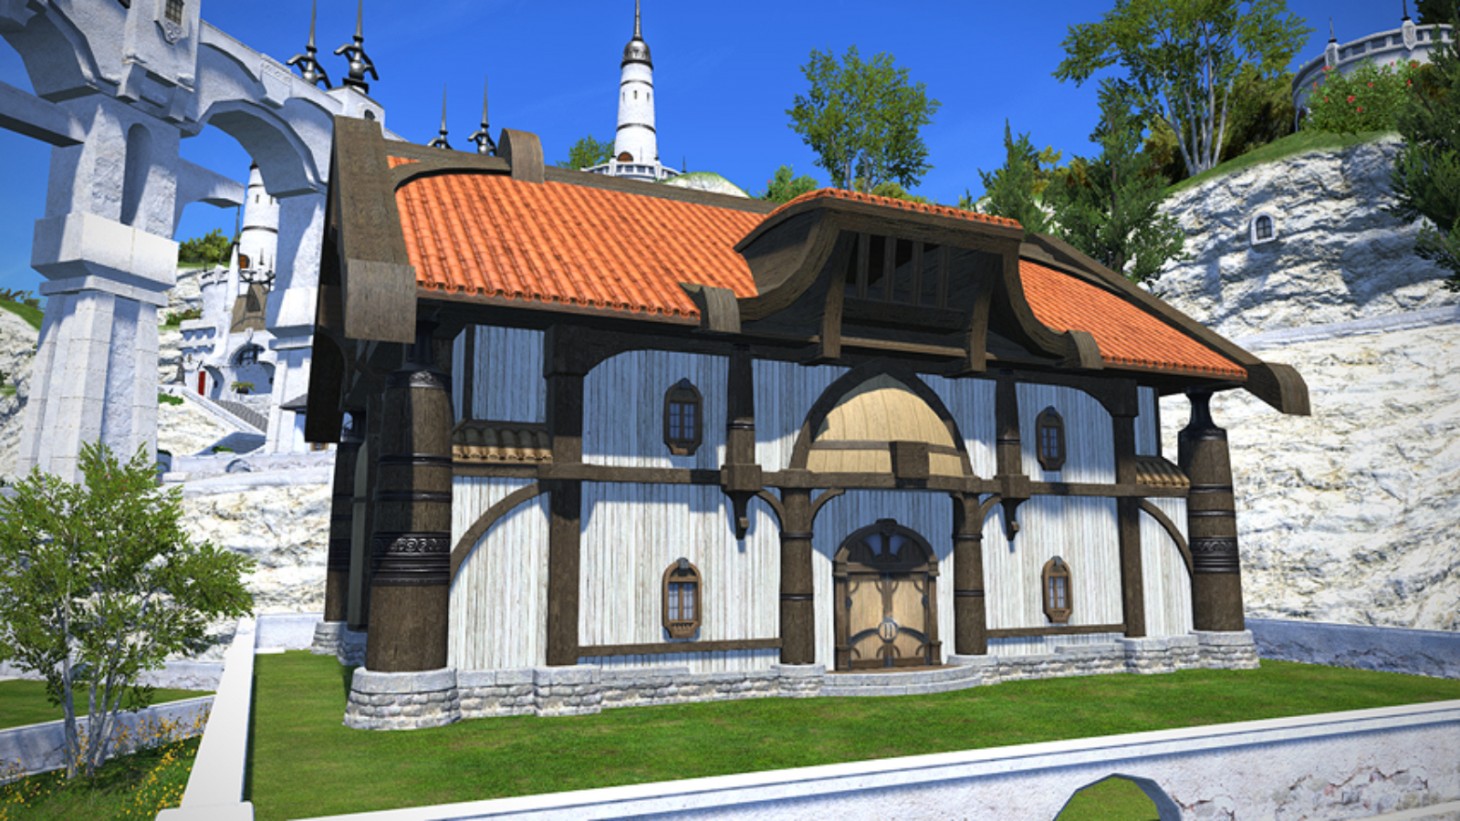 The Final Fantasy 14 Housing Lottery Is Finally Fixed